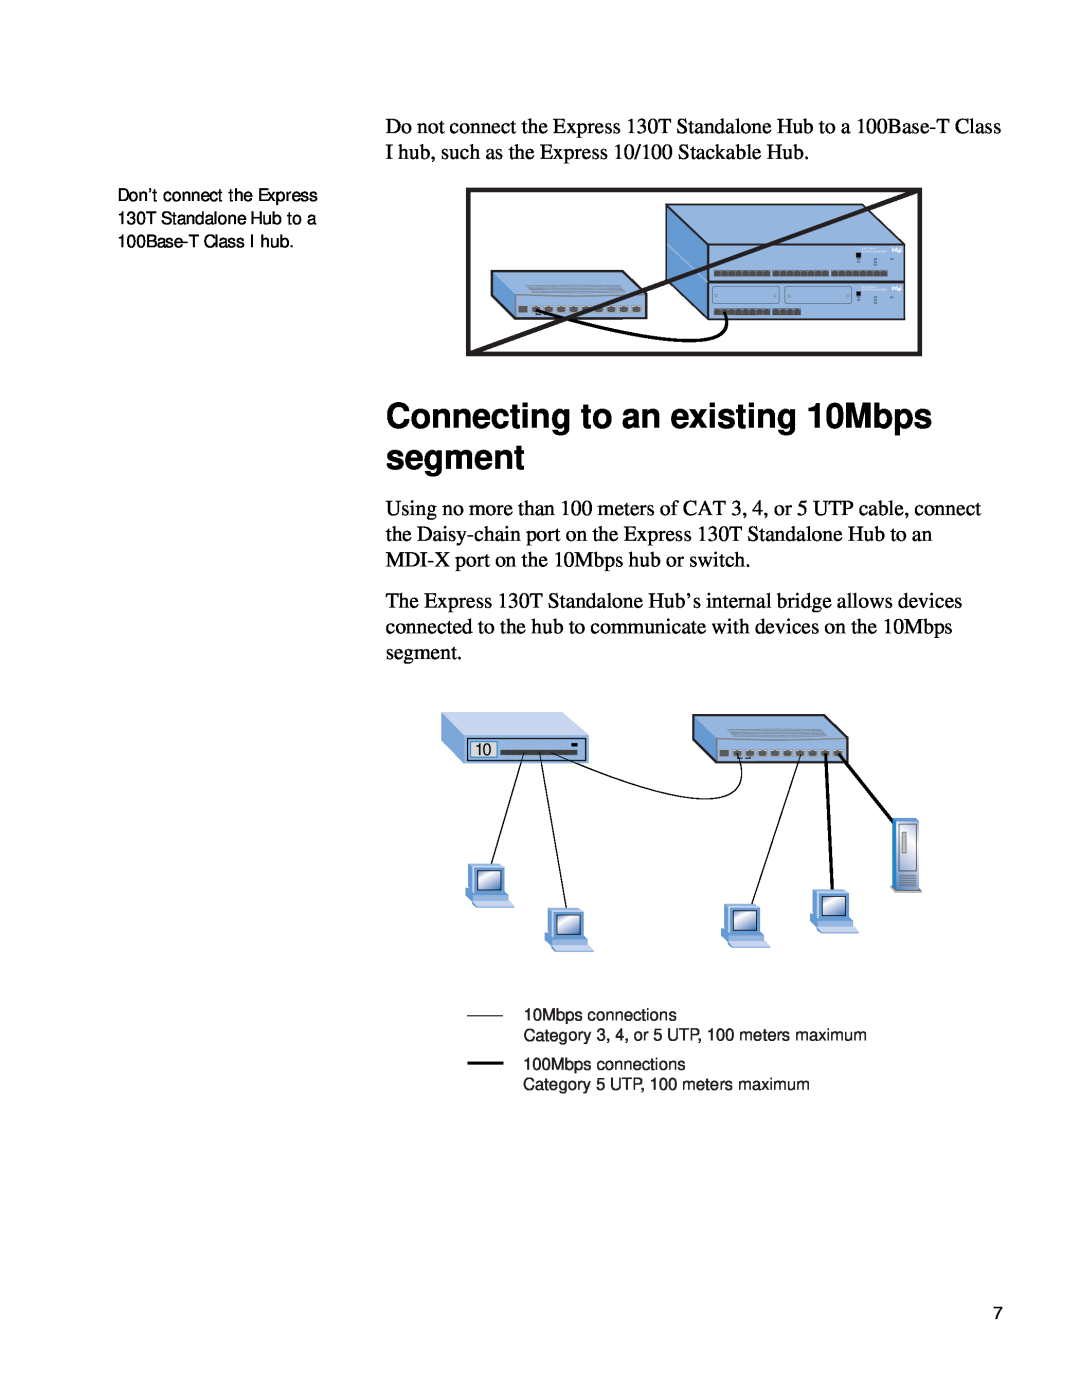 Intel 130T manual Connecting to an existing 10Mbps segment, 10Mbps connections Category 3, 4, or 5 UTP, 100 meters maximum 